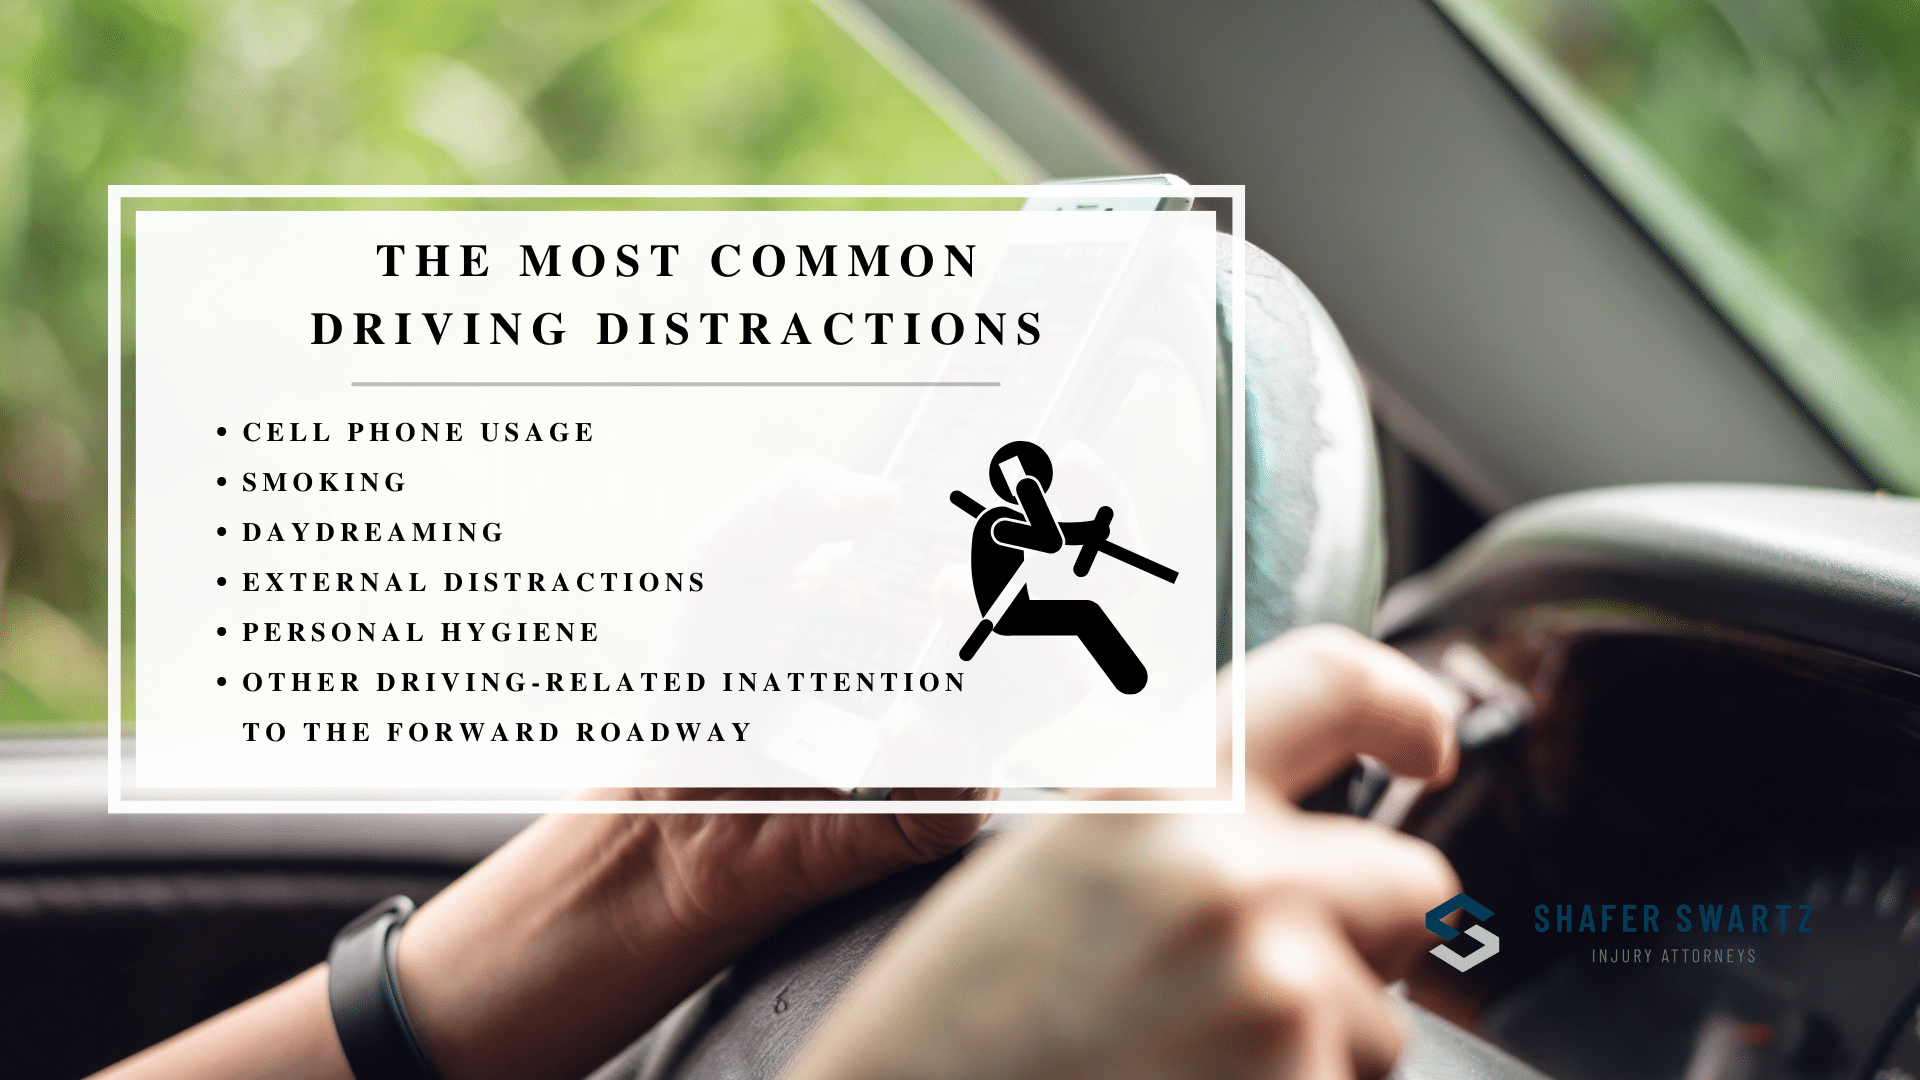 Infographic image of the most common driving distractions